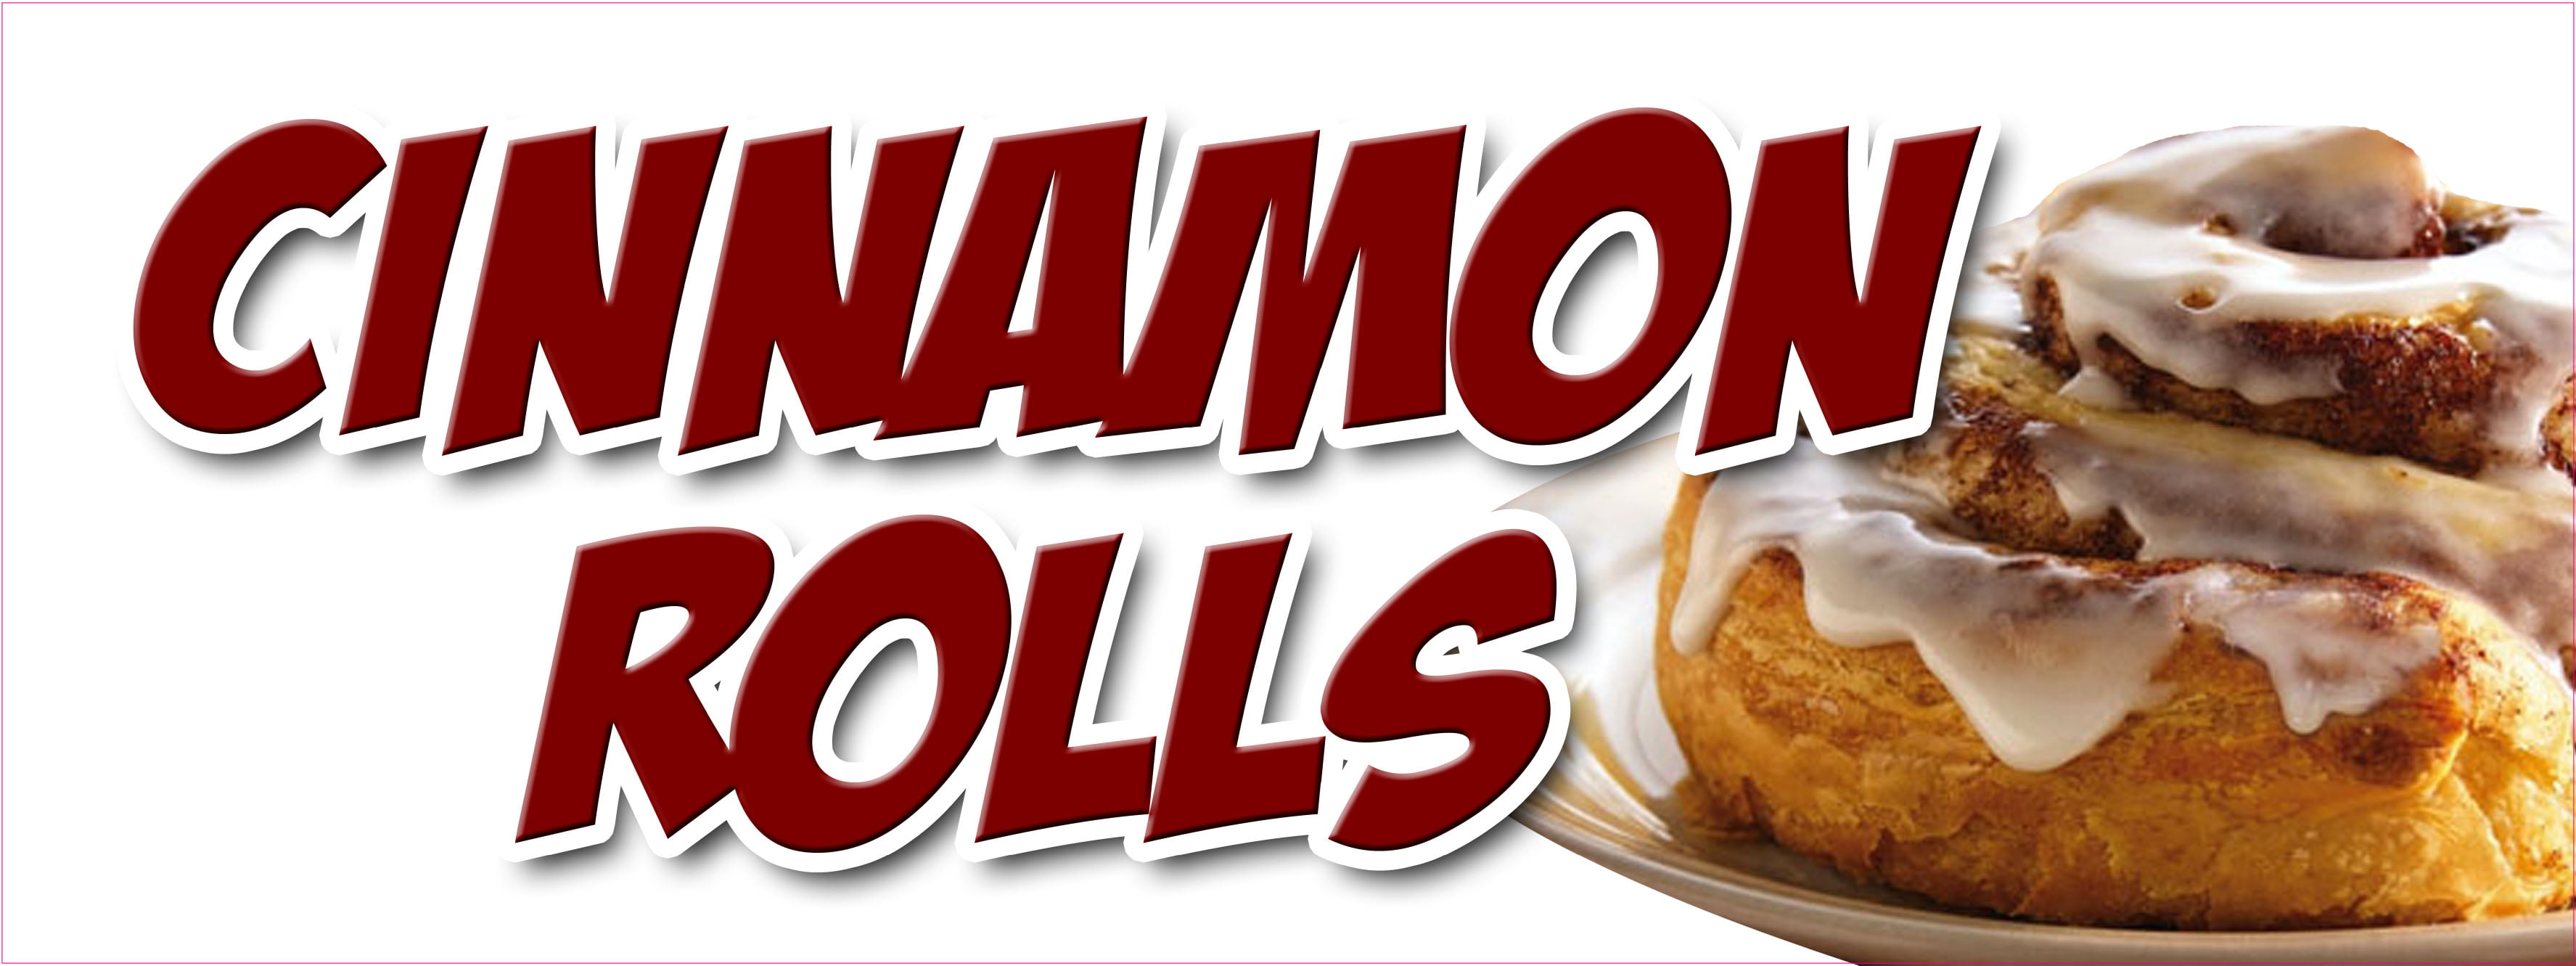 Frosted Cinnamon Rolls DECAL CHOOSE YOUR SIZE Food Truck Concession Sticker 